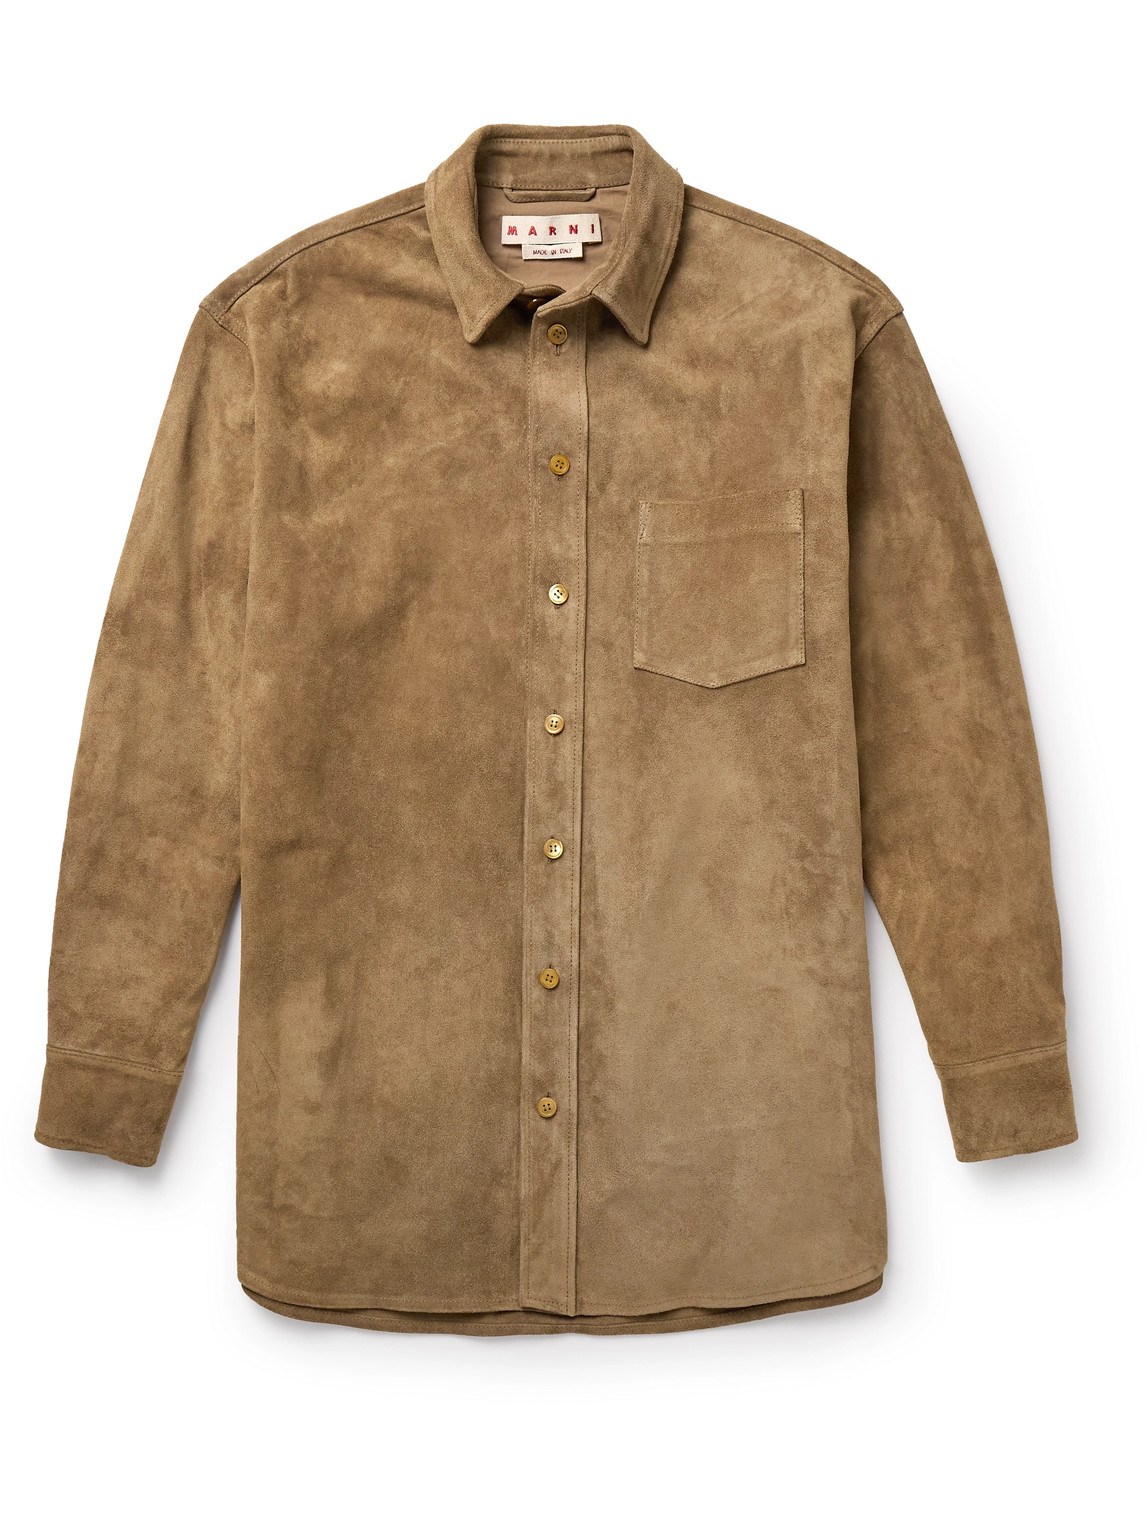 Marni Suede Overshirt In Brown